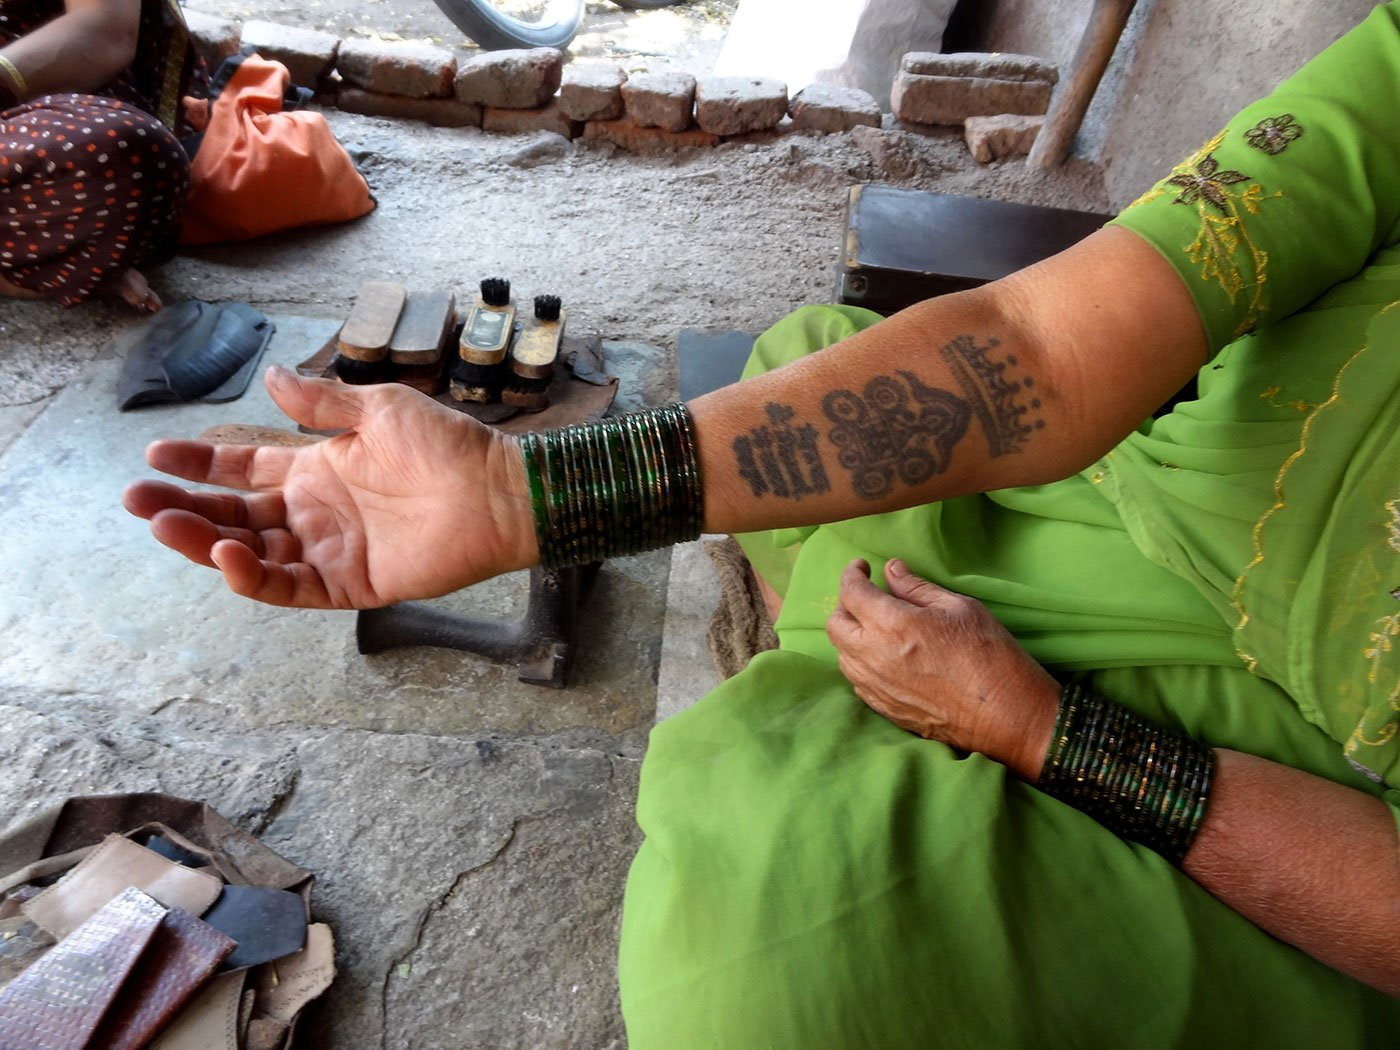 07-Bhamabai_Tattoo2_DSC01565-NW-Fixing Straps and Mending Soles.jpg